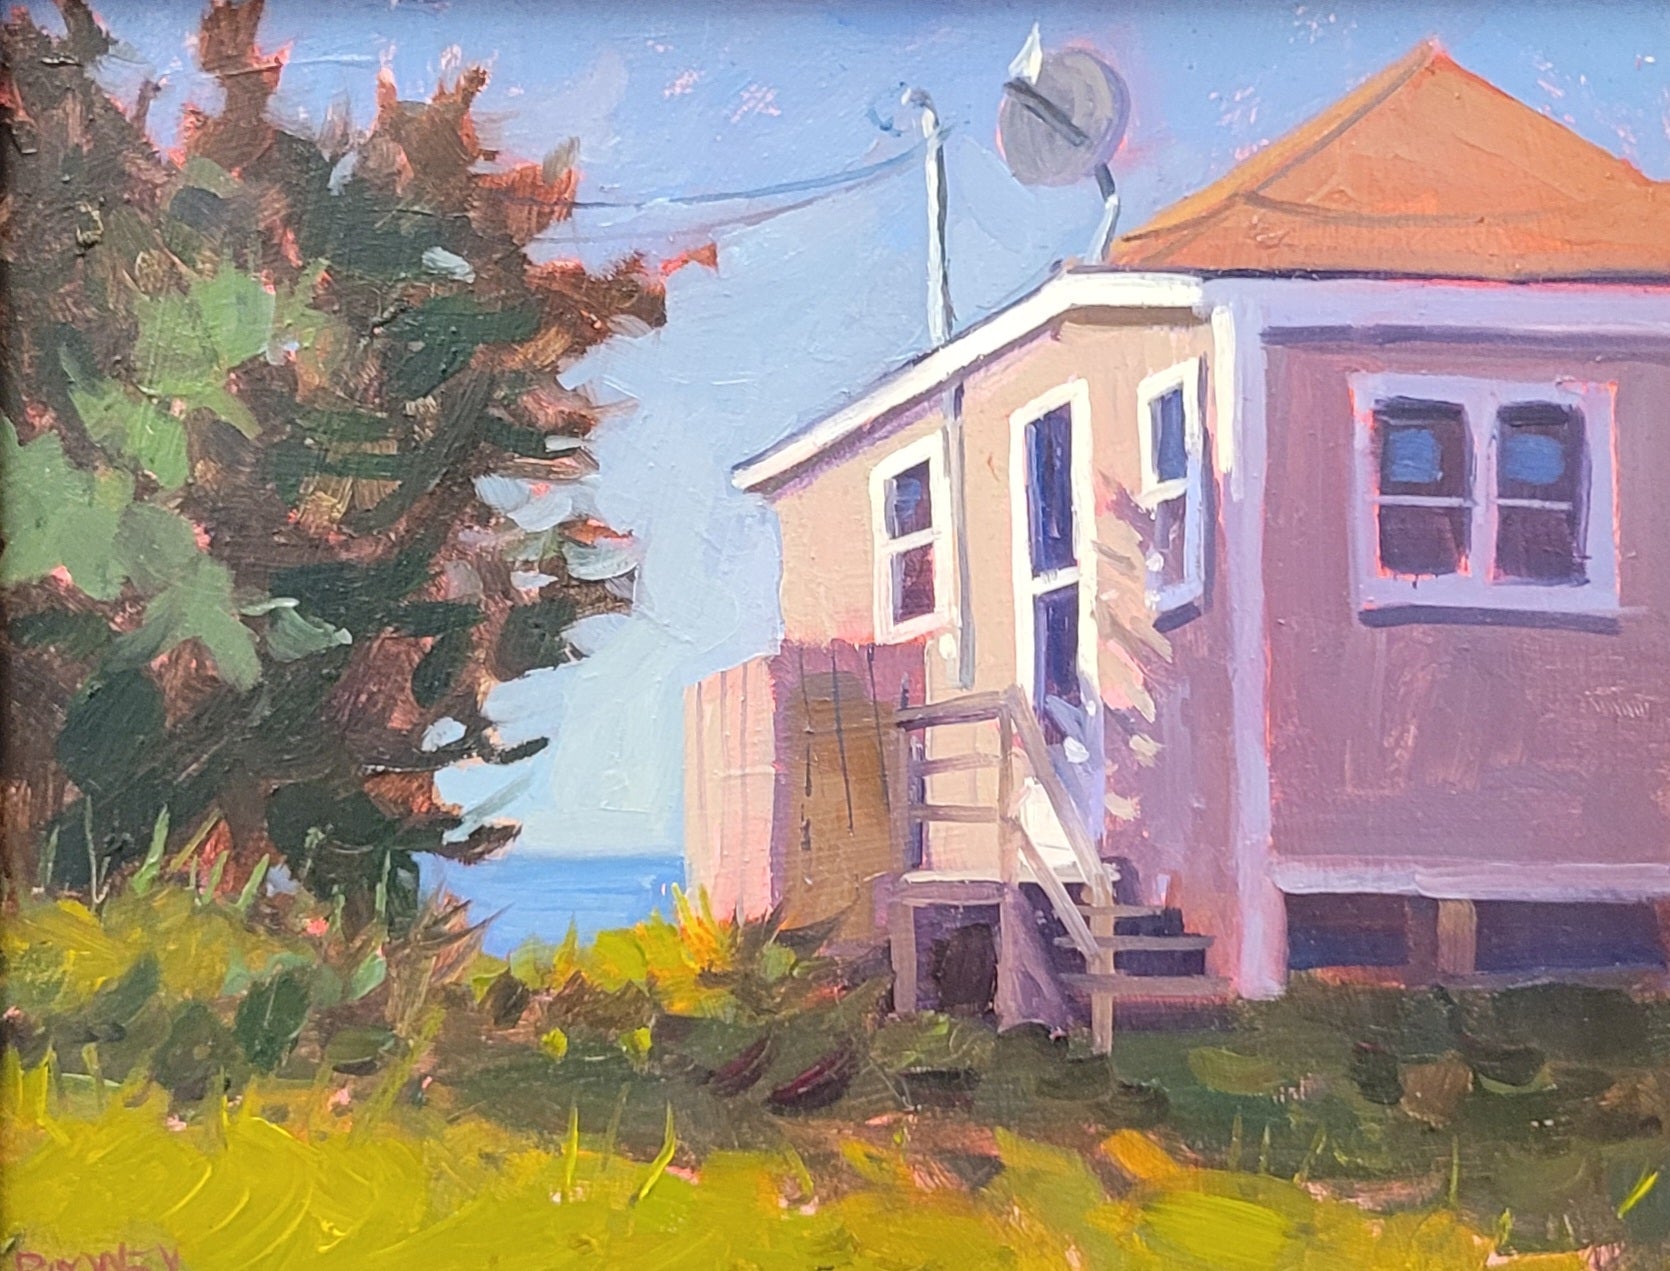 Mike Rooney Waterfront Abode🎨 Mike Rooney🎨 Buy Art at Carolina Creations Gallery in Downtown New Bern🎨